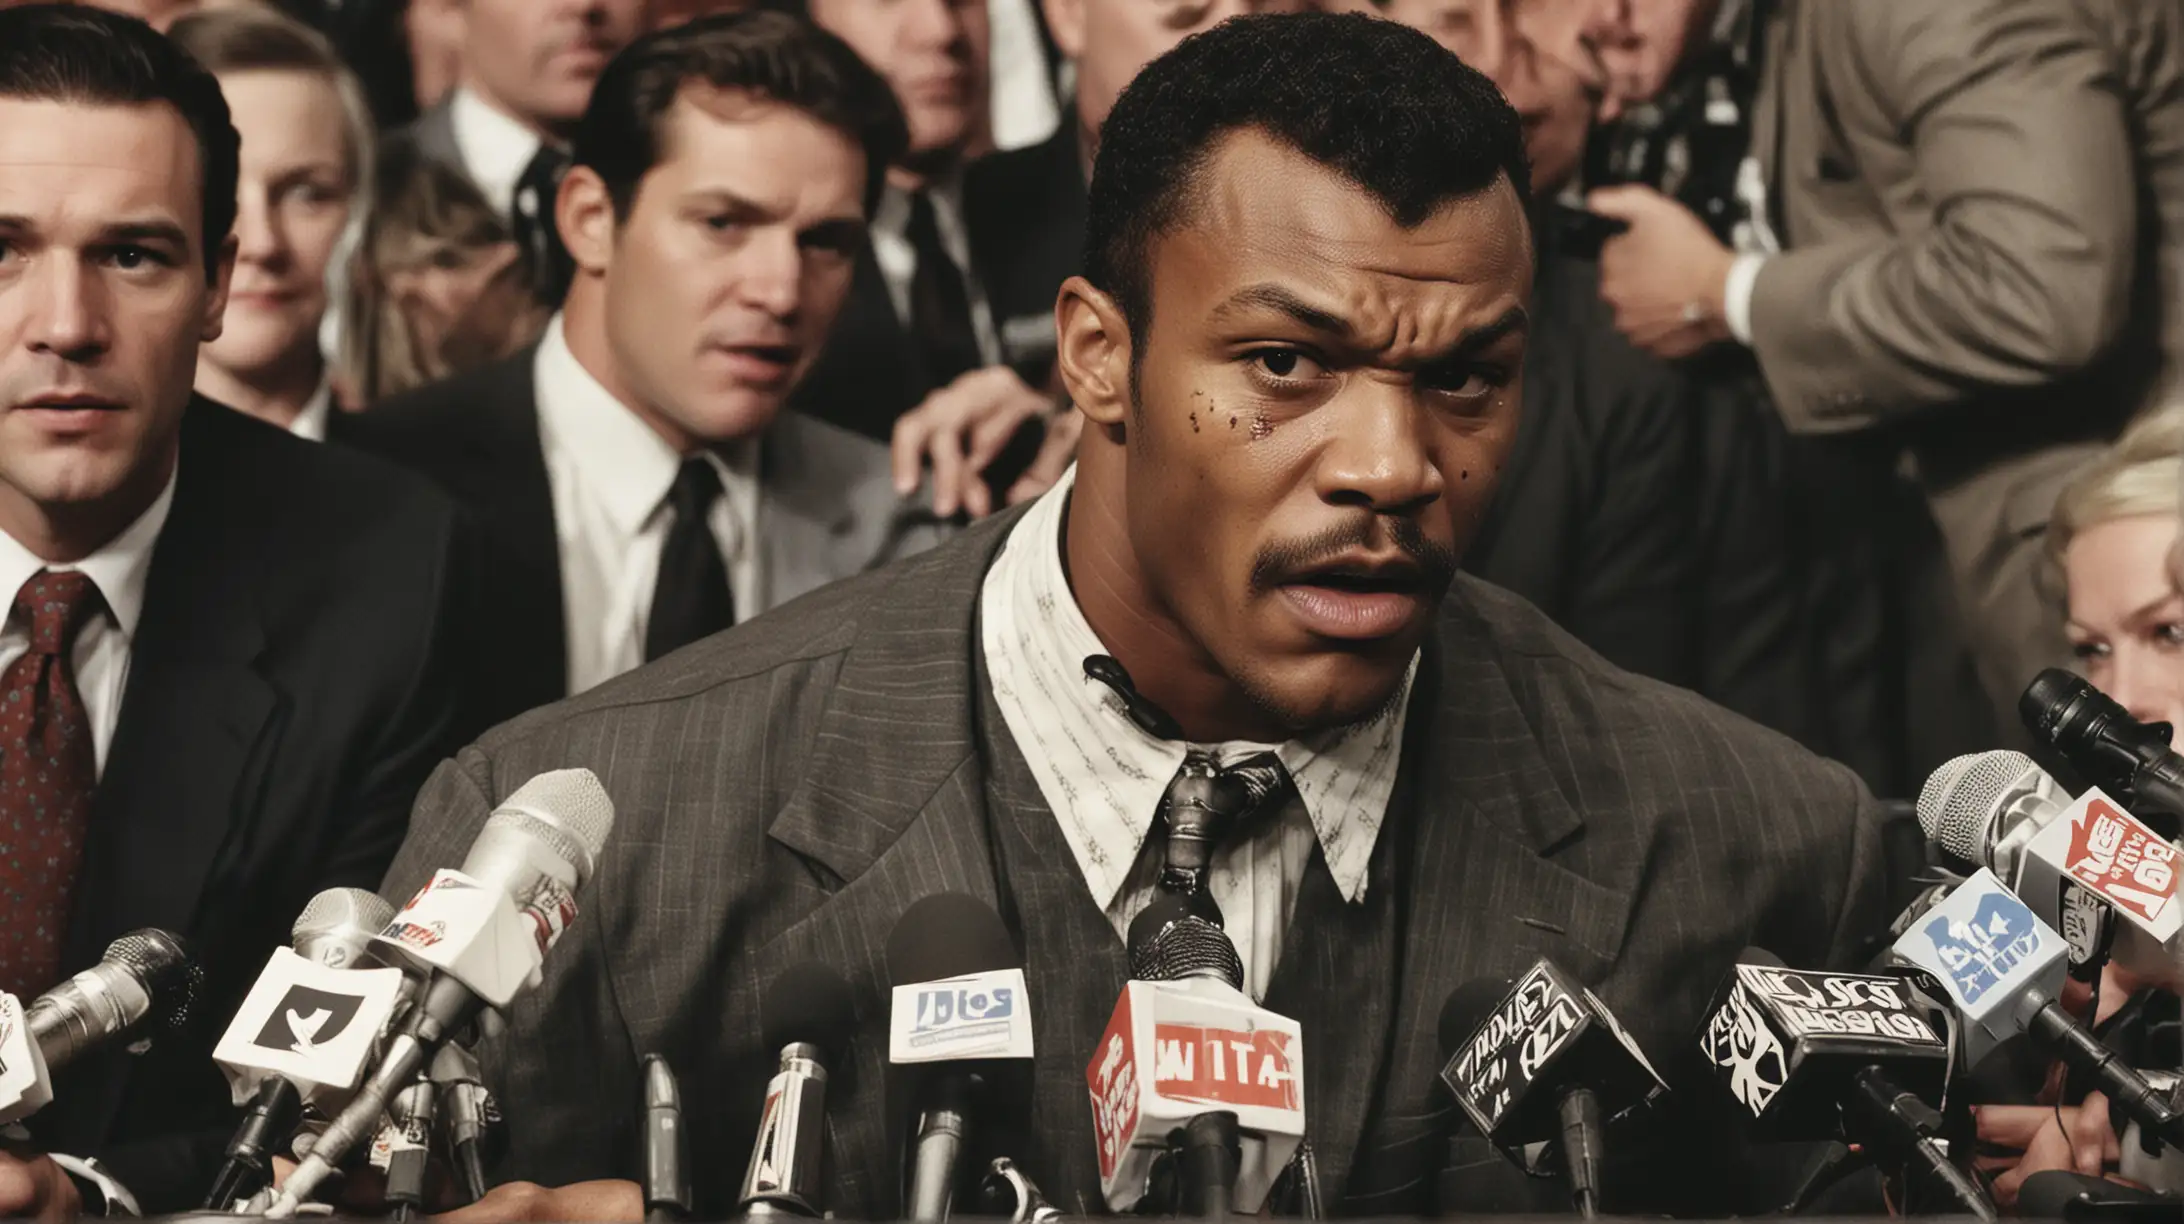 Create a realistic image of Tyson at a press conference, looking agitated, surrounded by microphones and reporters. The atmosphere is tense, reflecting a controversial period in his career.